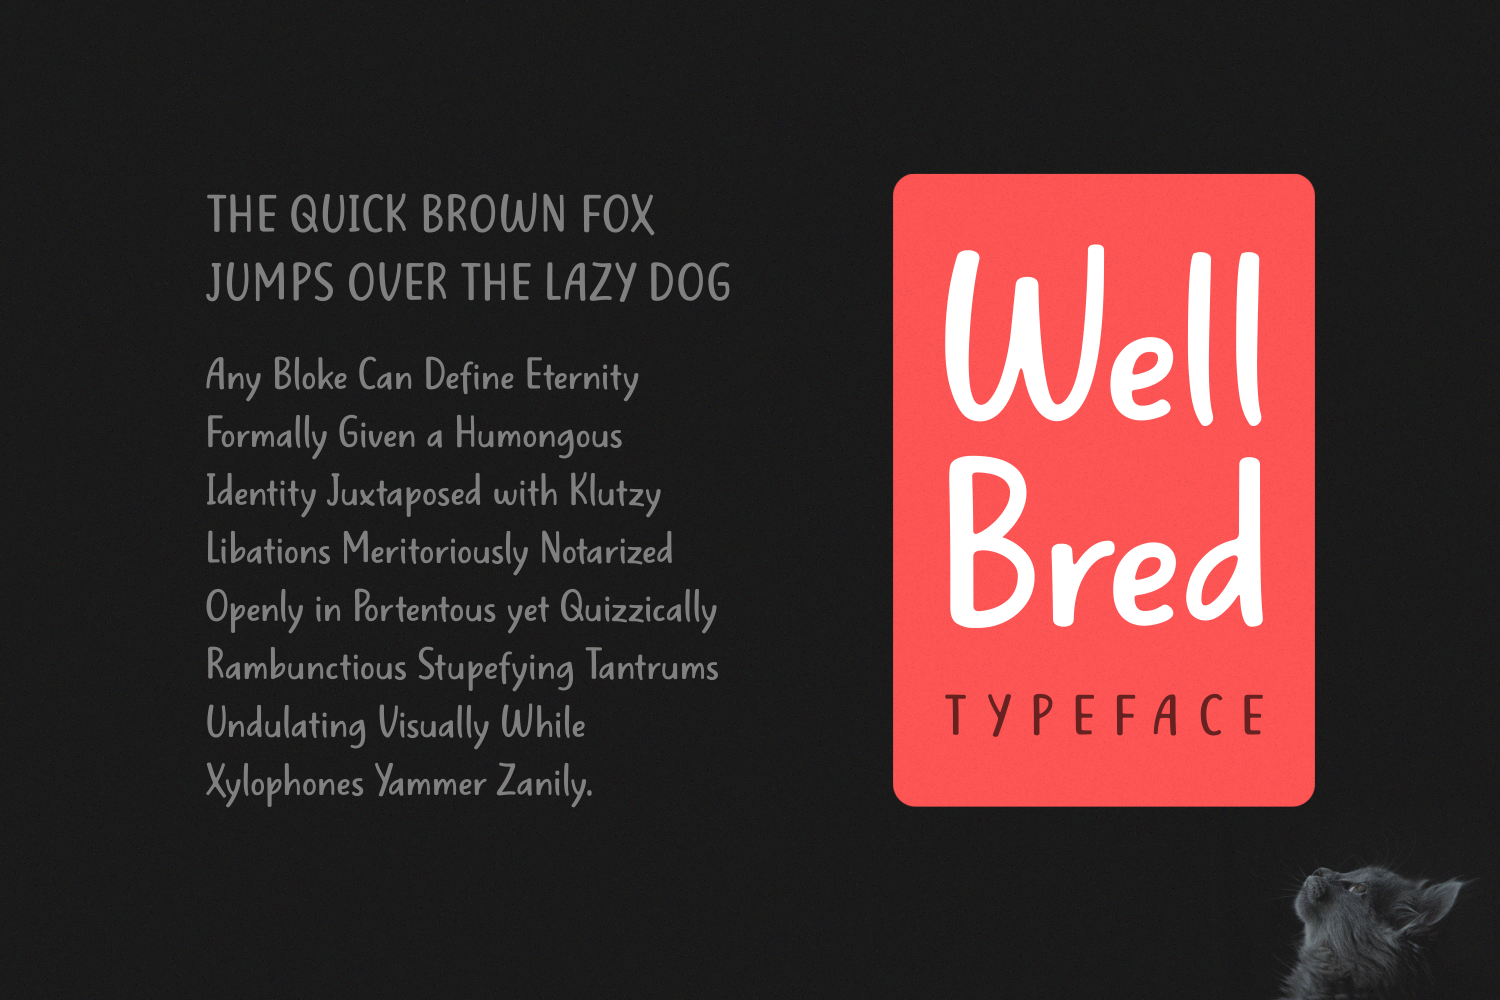 Well Bred Font